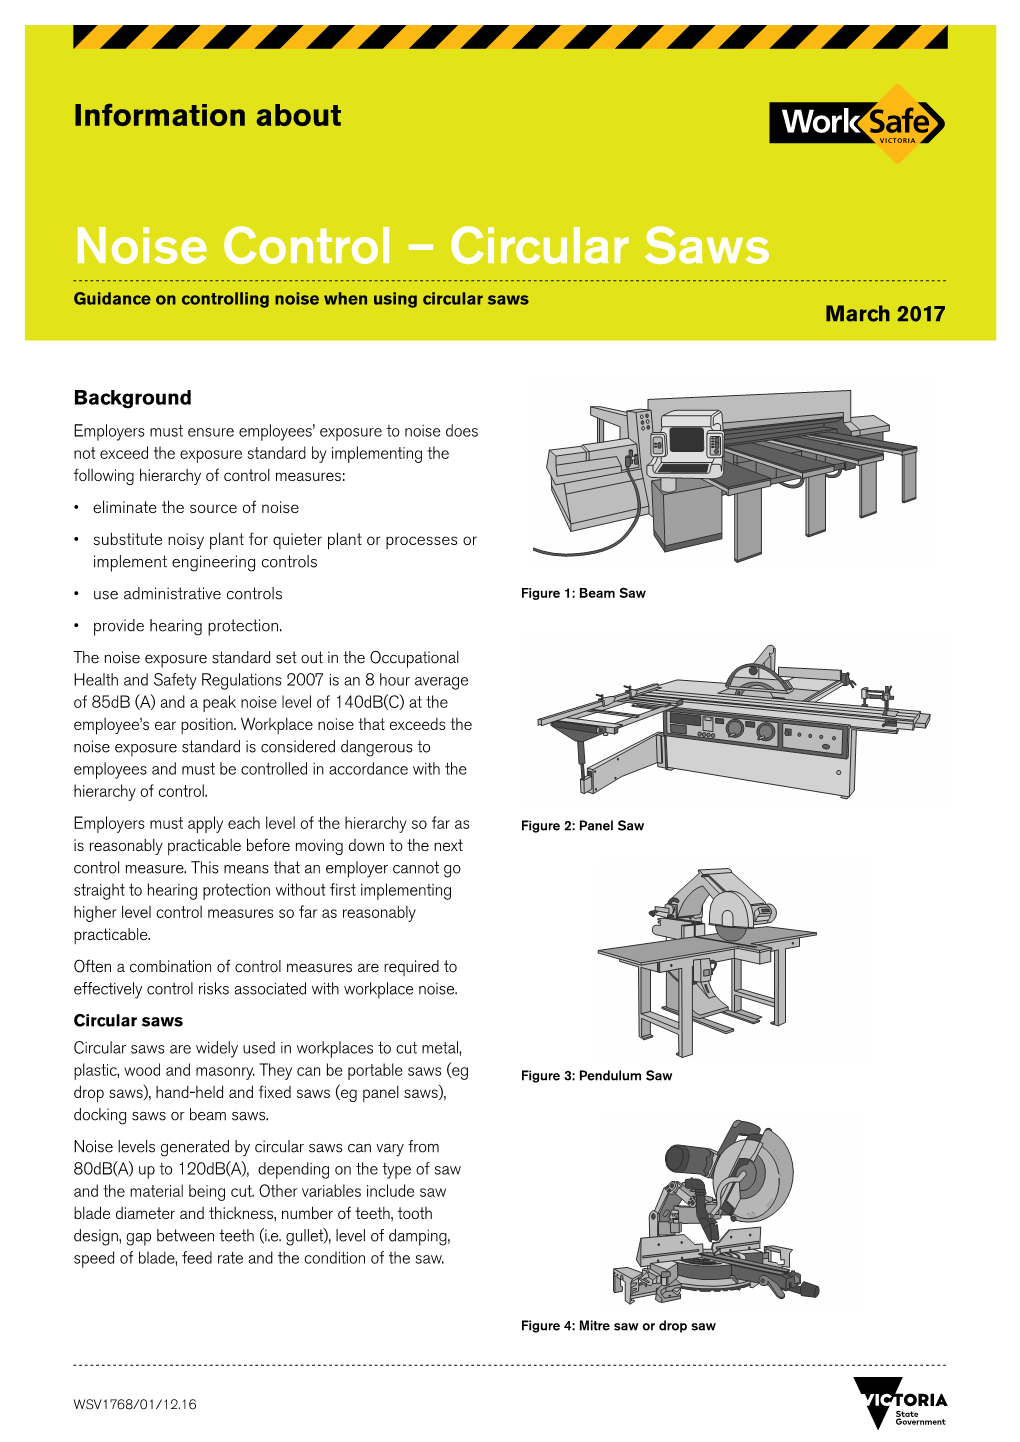 Noise Control – Circular Saws Guidance on Controlling Noise When Using Circular Saws March 2017